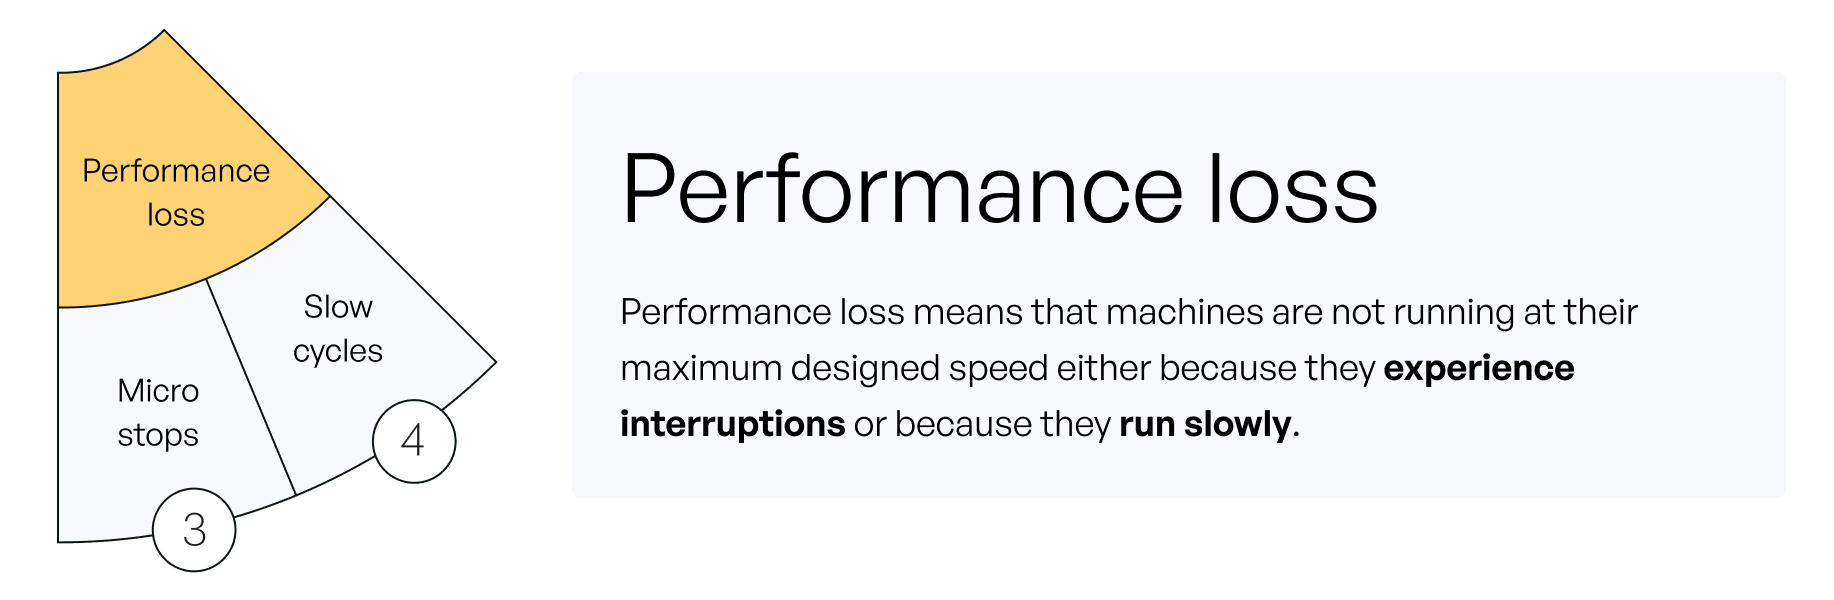 performance loss frequent interruptions slow running